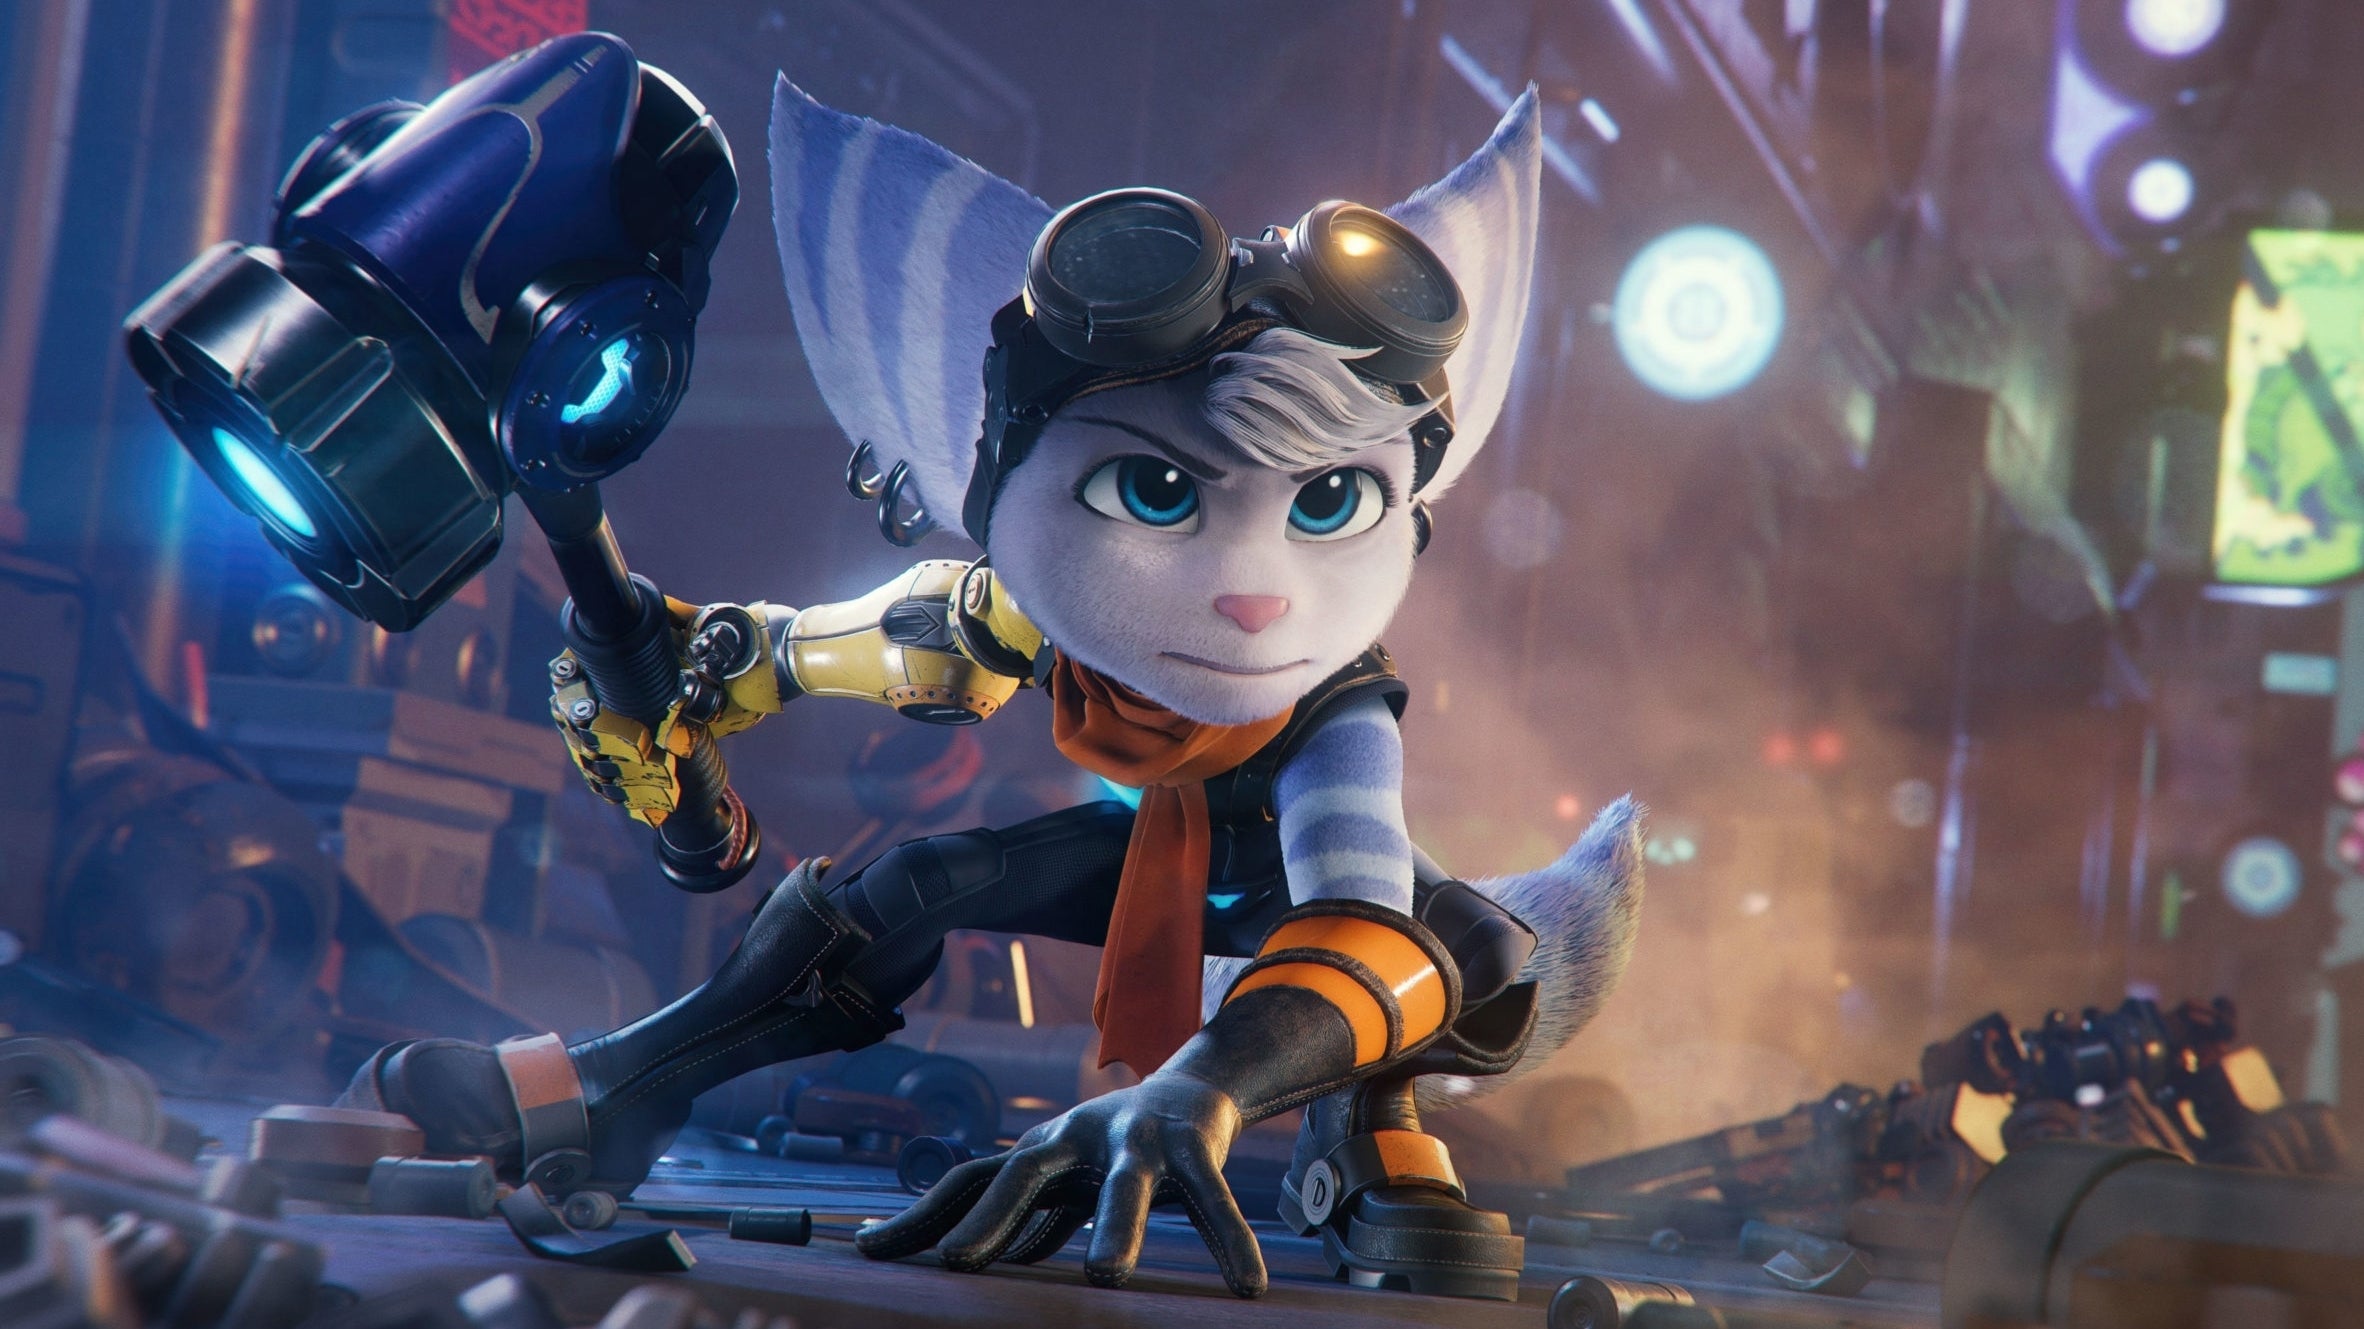 Image for Ratchet and Clank: Rift Apart review - cracking, unserious action